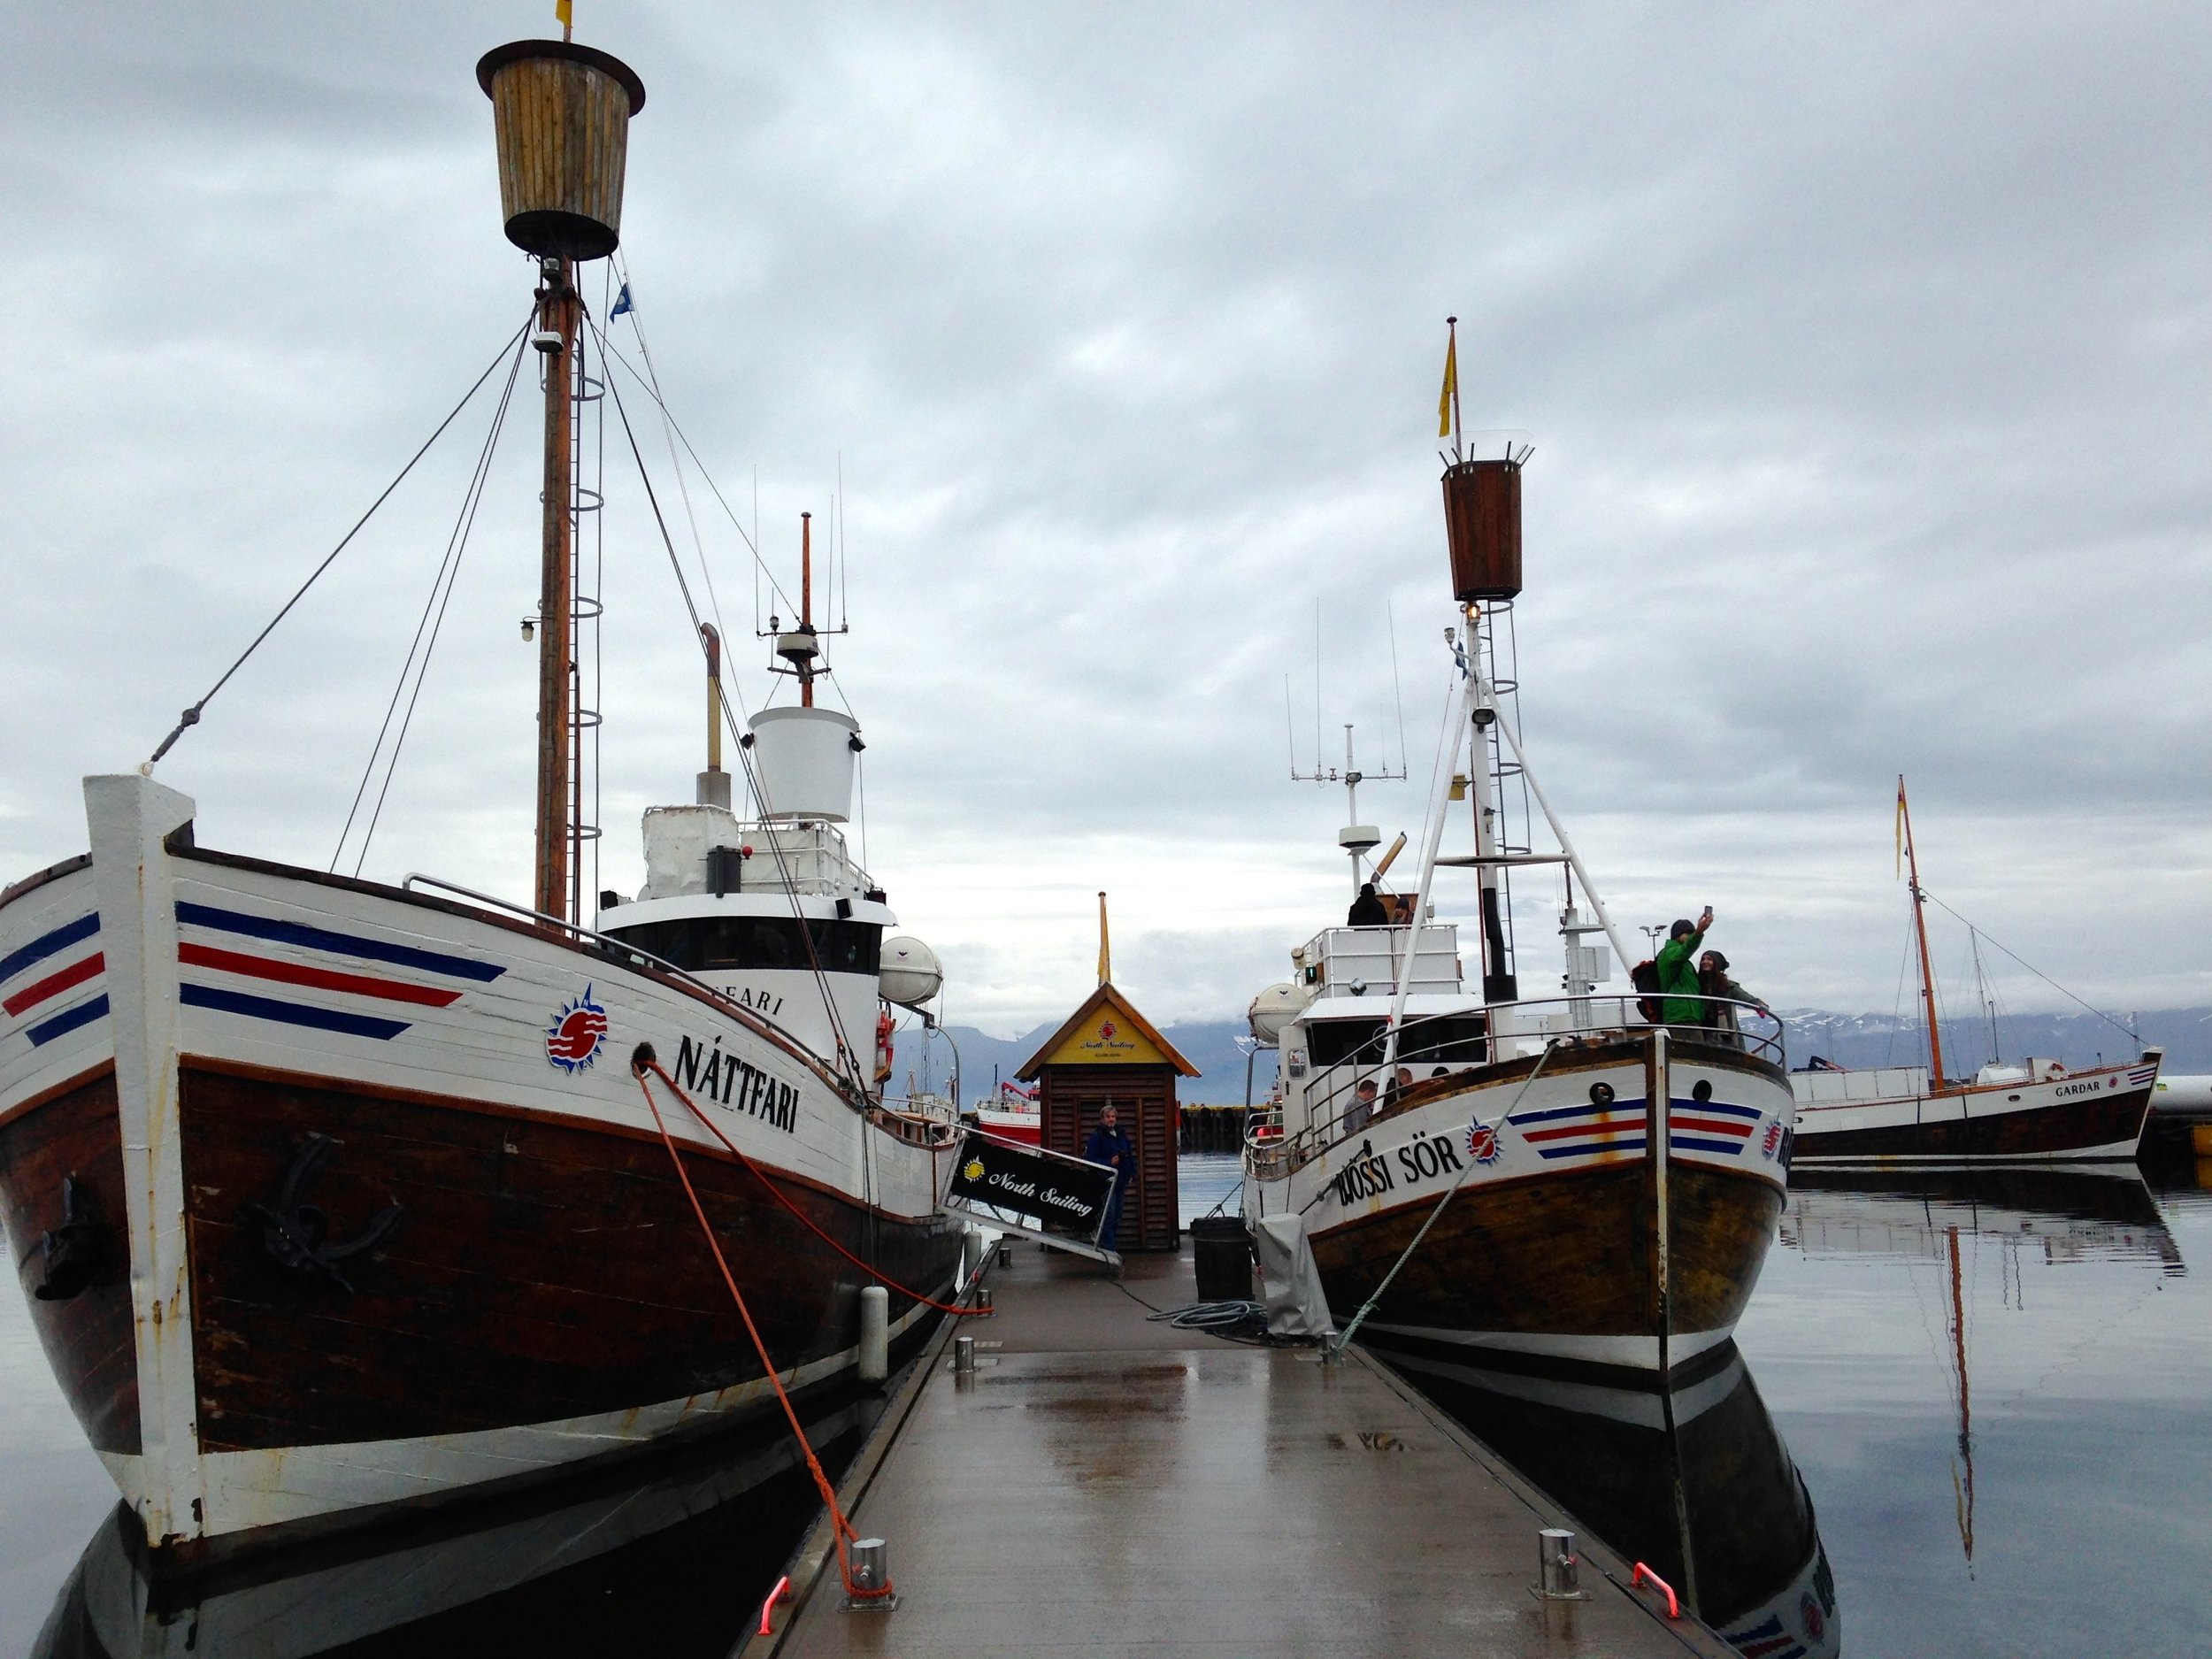 Husavik, Iceland. We went whale-watching in the boat on the right.